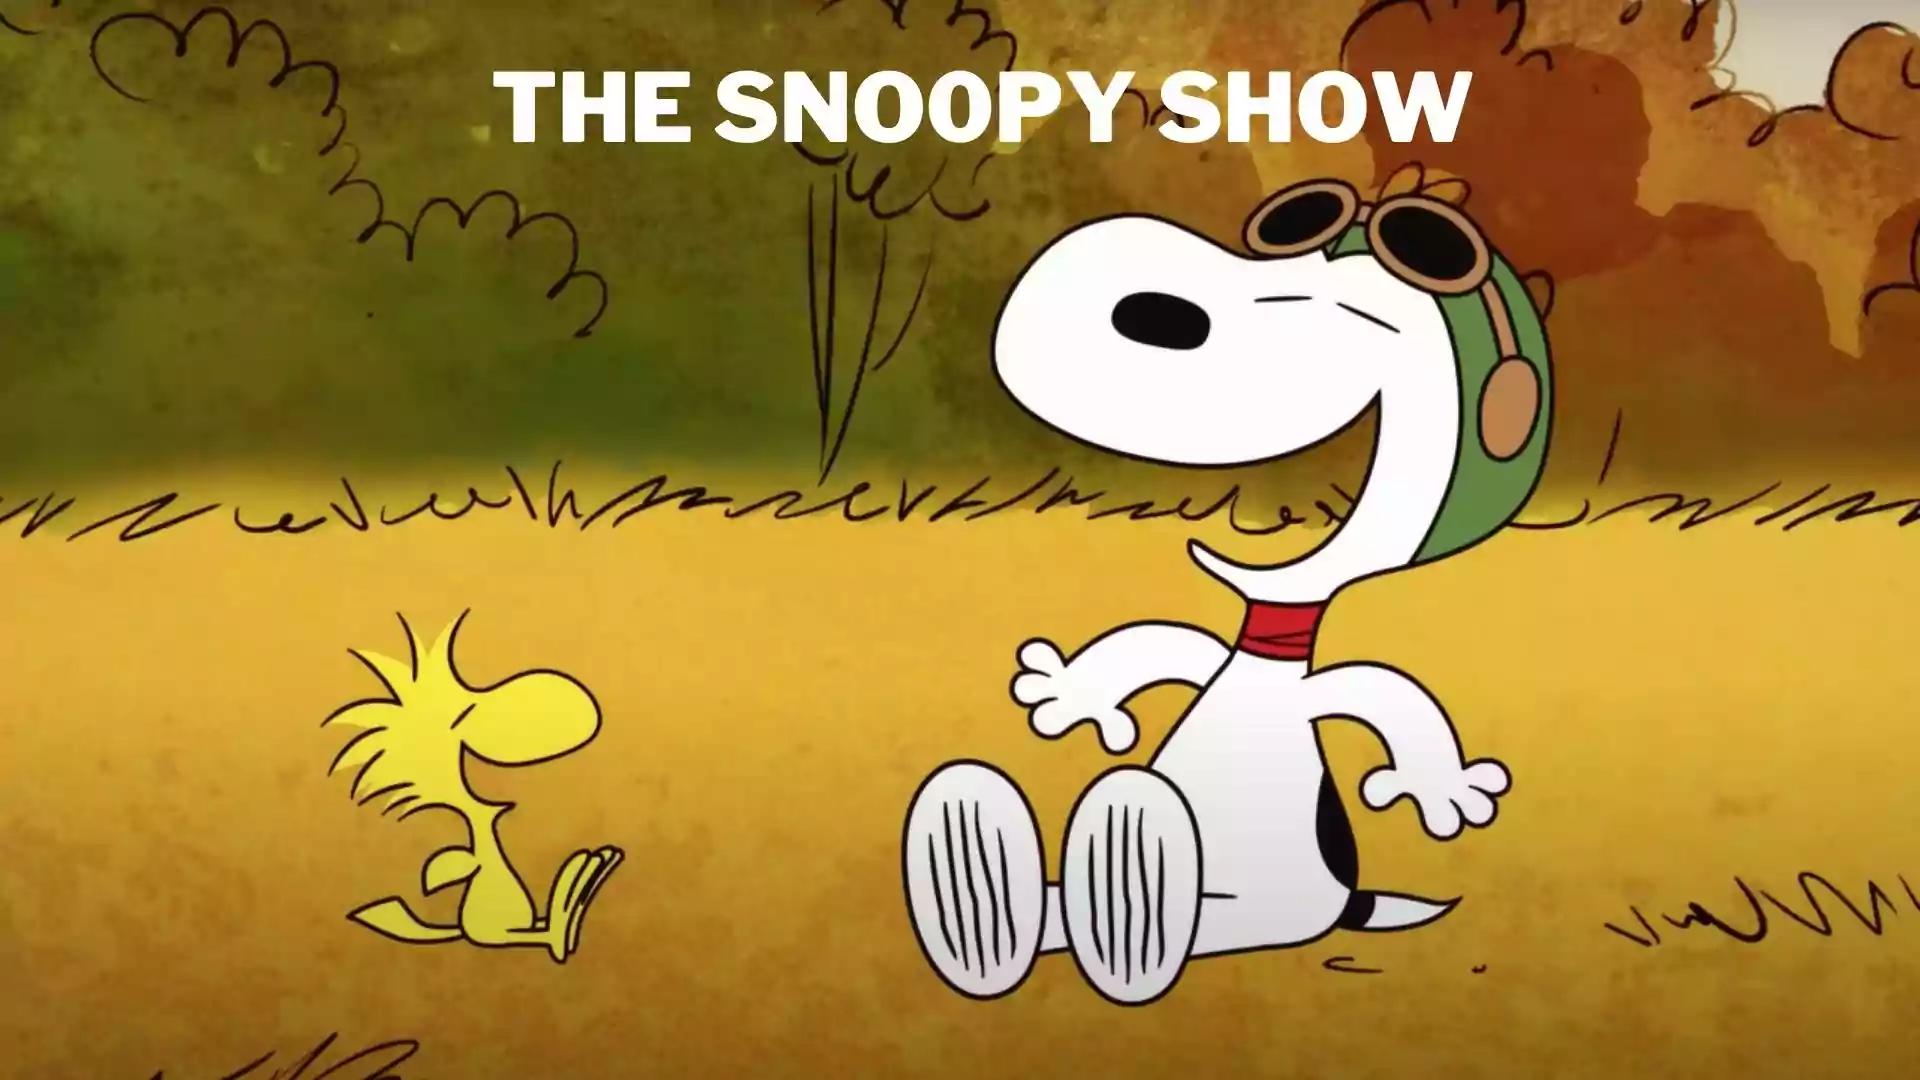 The Snoopy Show Parents Guide and Age Rating